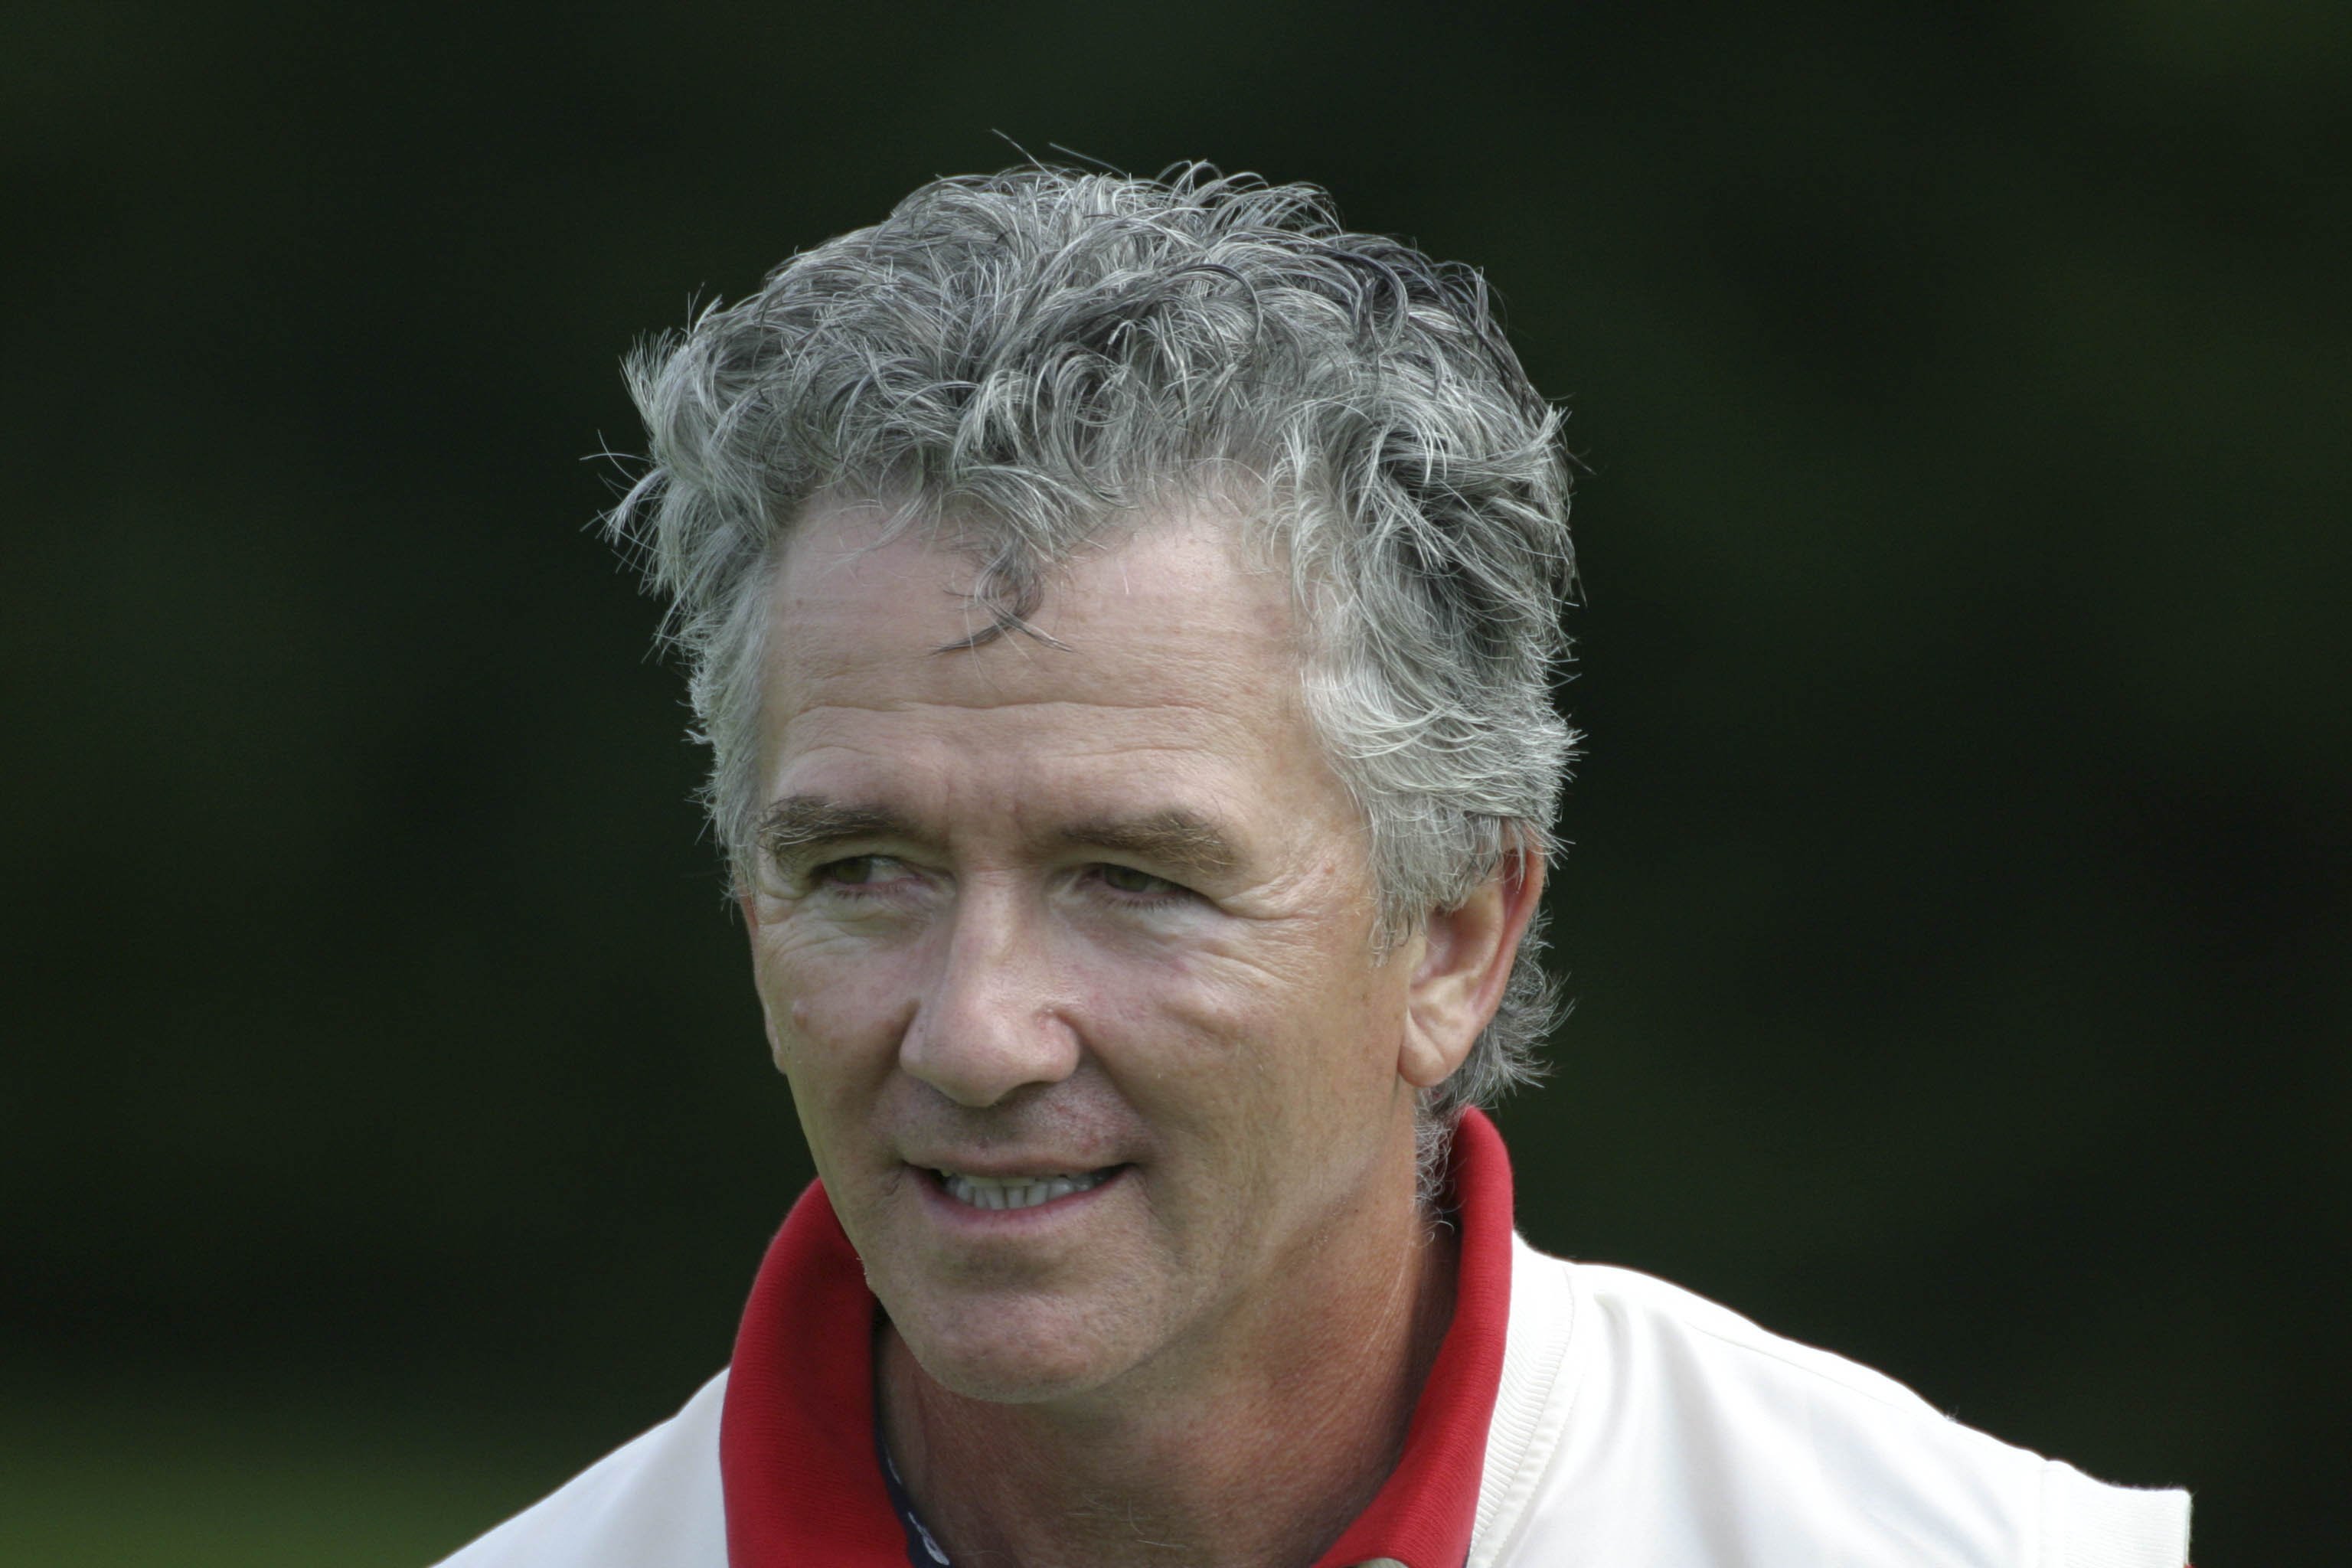 Patrick Duffy at the Celtic Manor Hotel, Usk Valley, South Wales on August 26, 2006. | Source: Getty Images